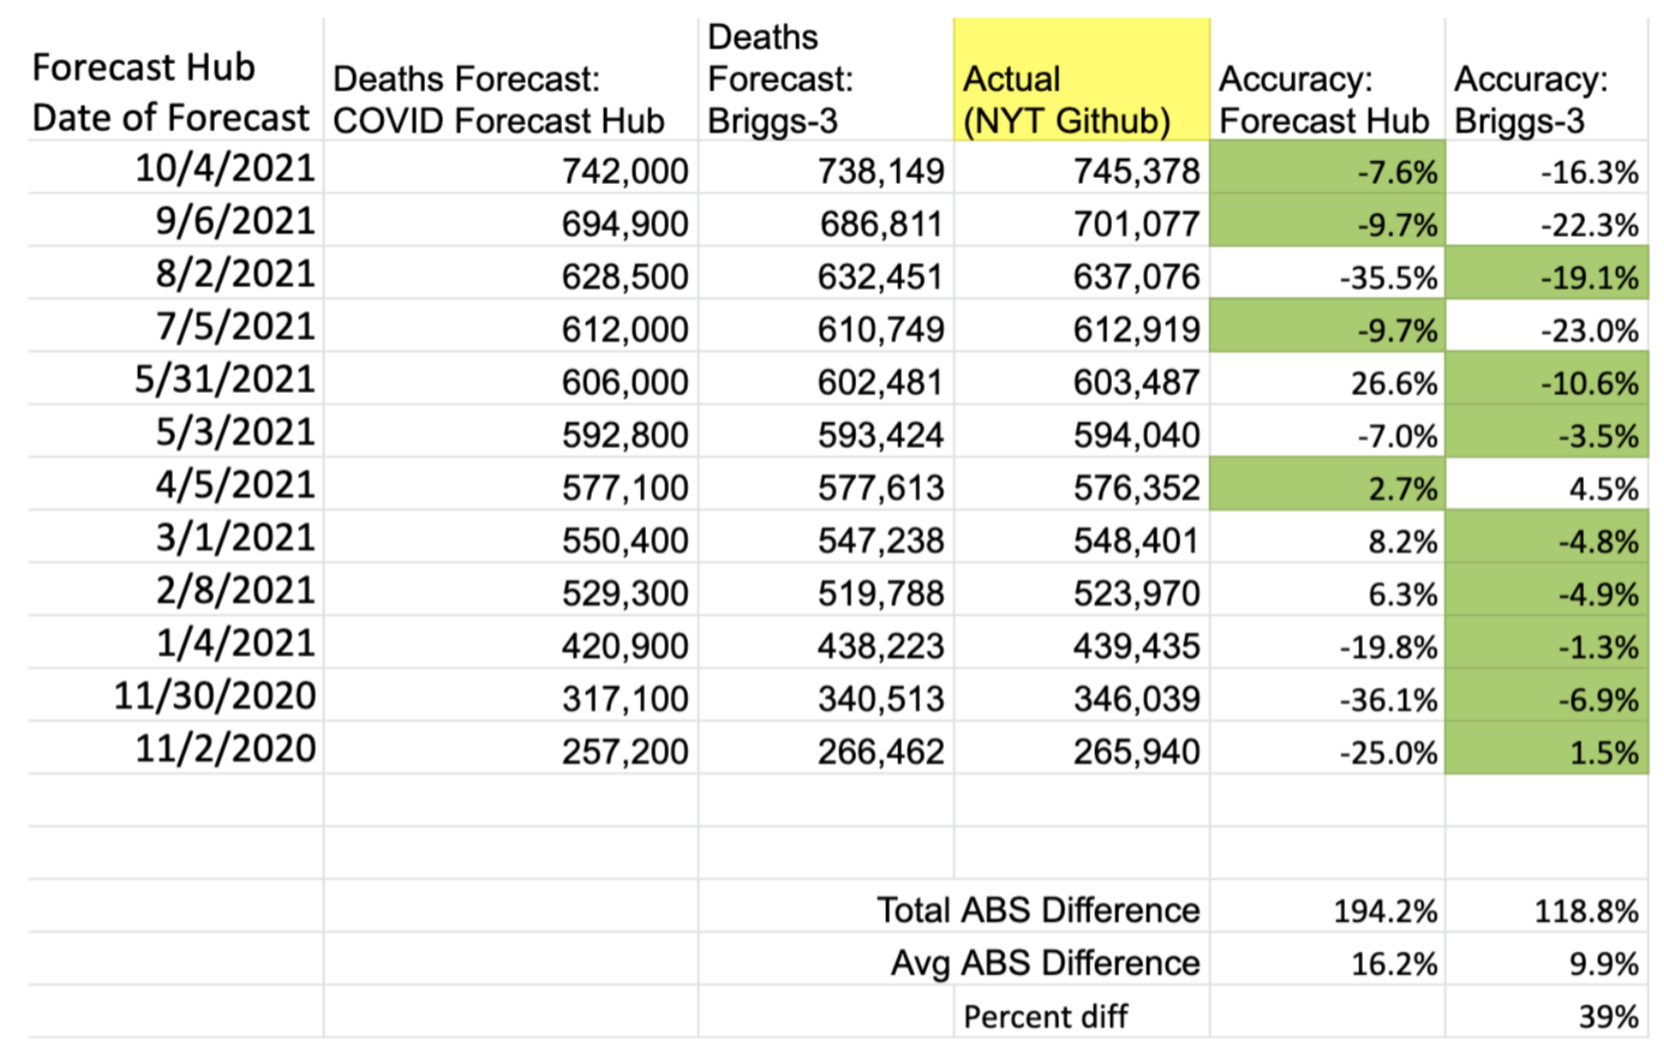 Table of COVID forecast Deaths and Forecast Vaccination Rates